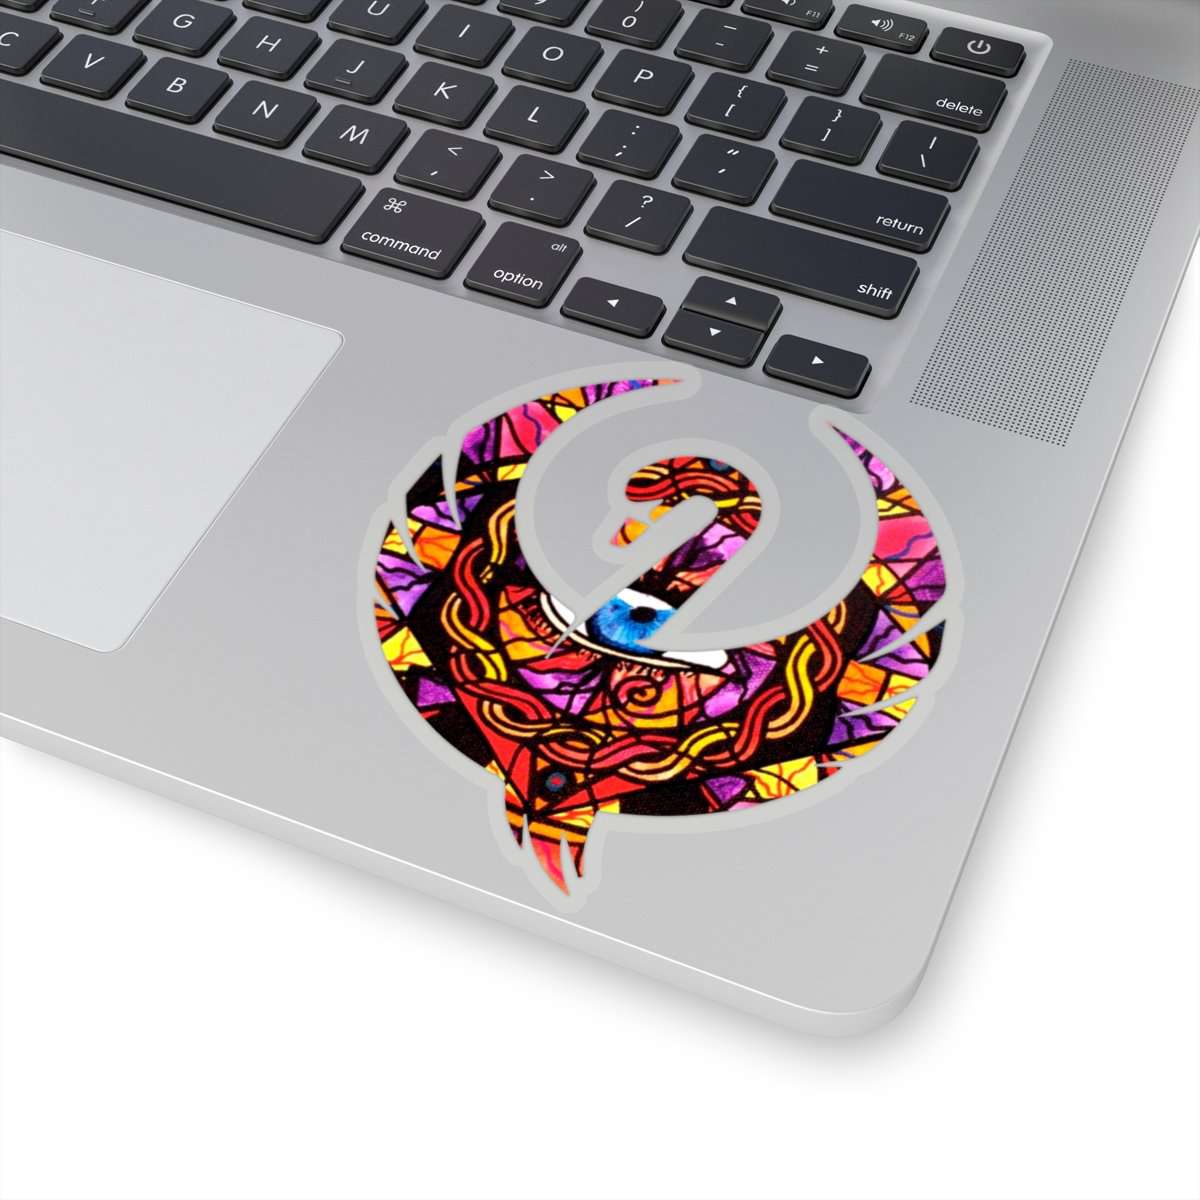 purchase-confident-self-expression-swan-stickers-hot-on-sale_9.jpg